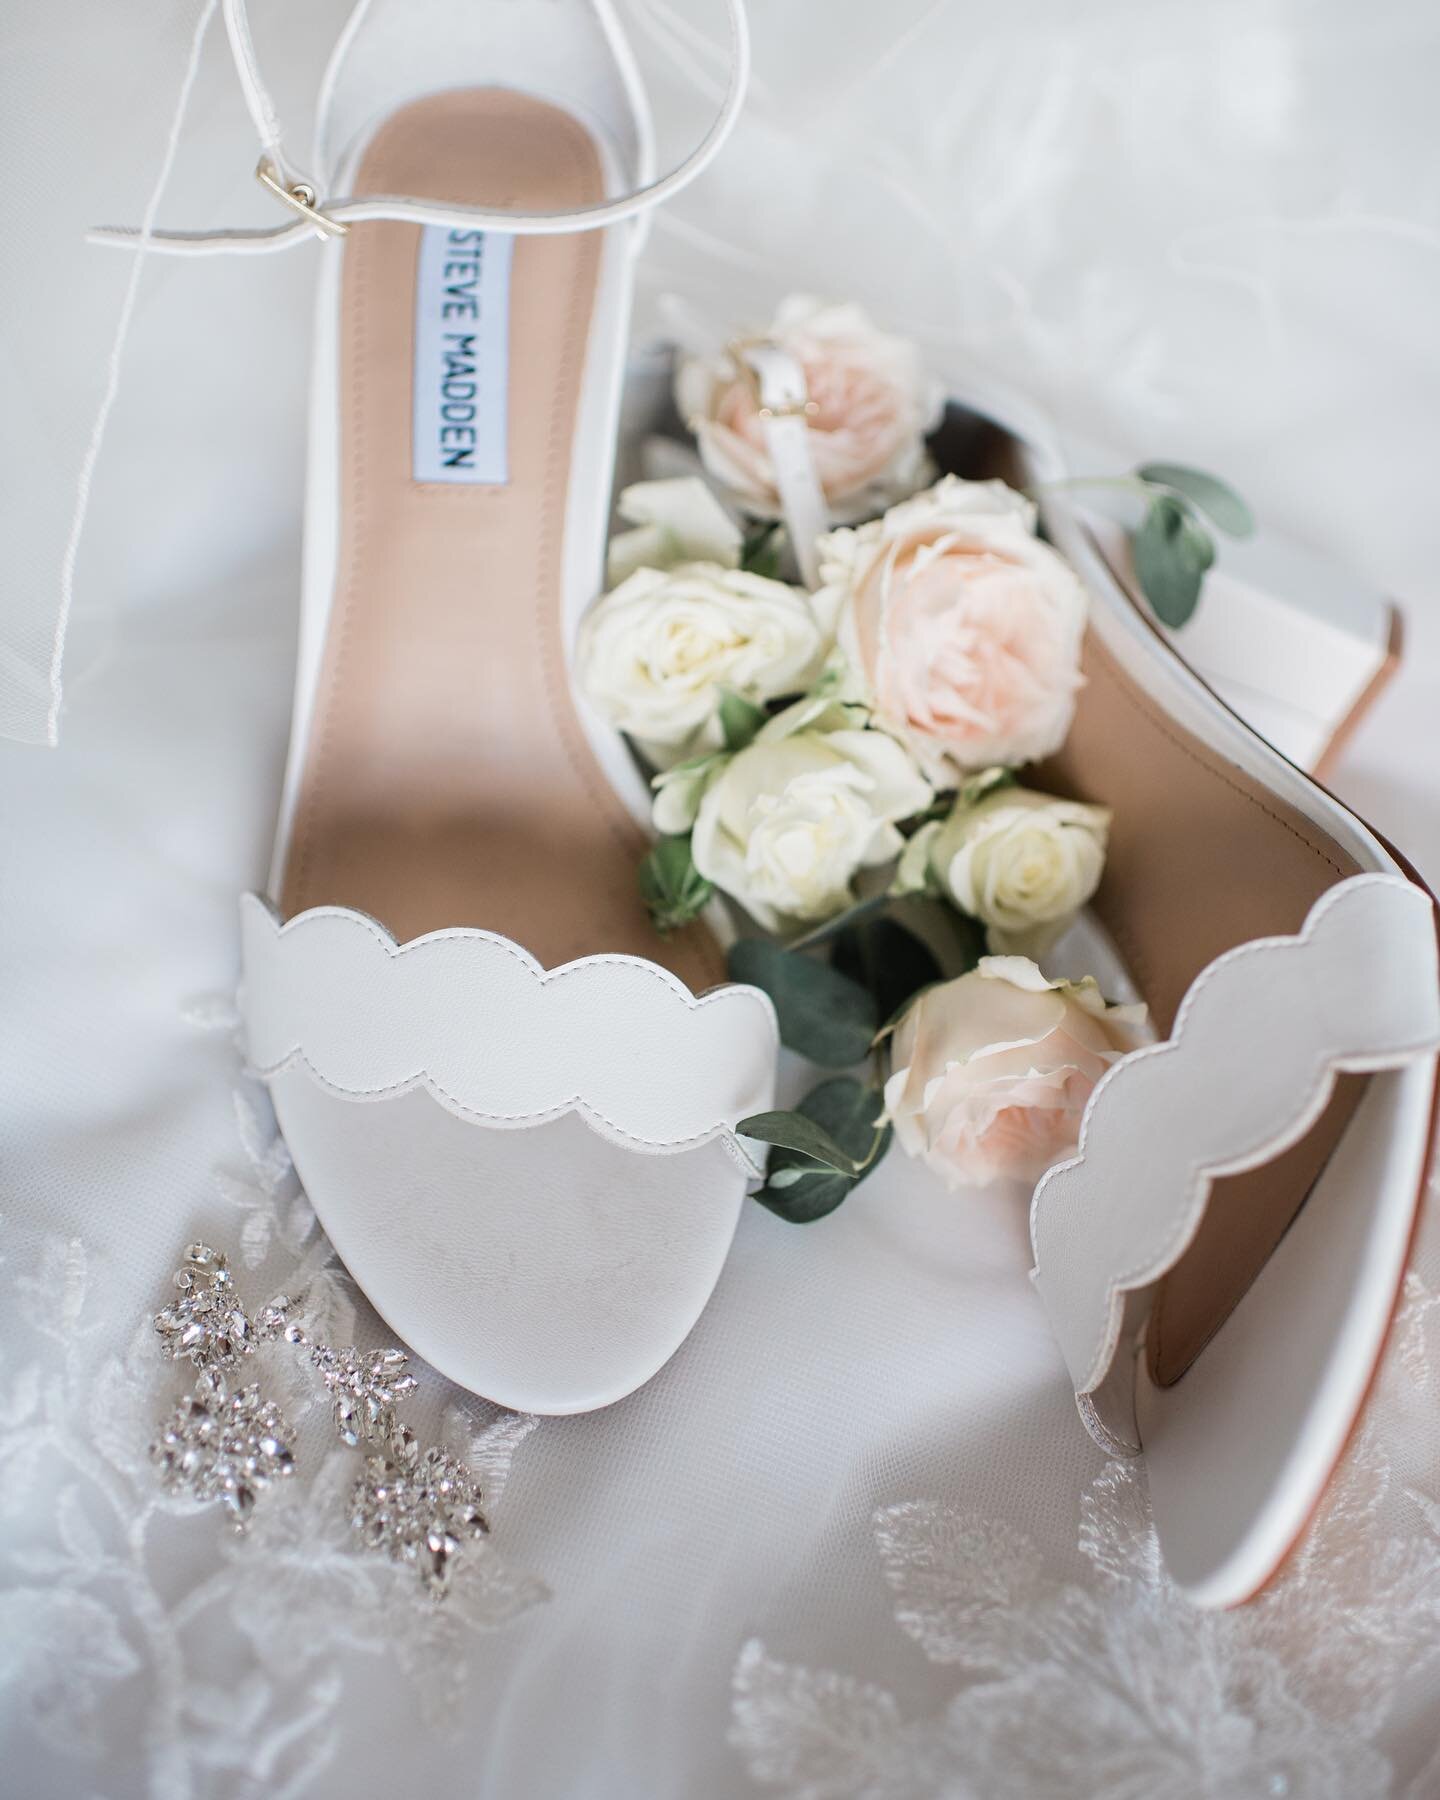 Leave it to @belluxe.studios to always style the cutest detailed photos. Flowers in a shoe? Why not!